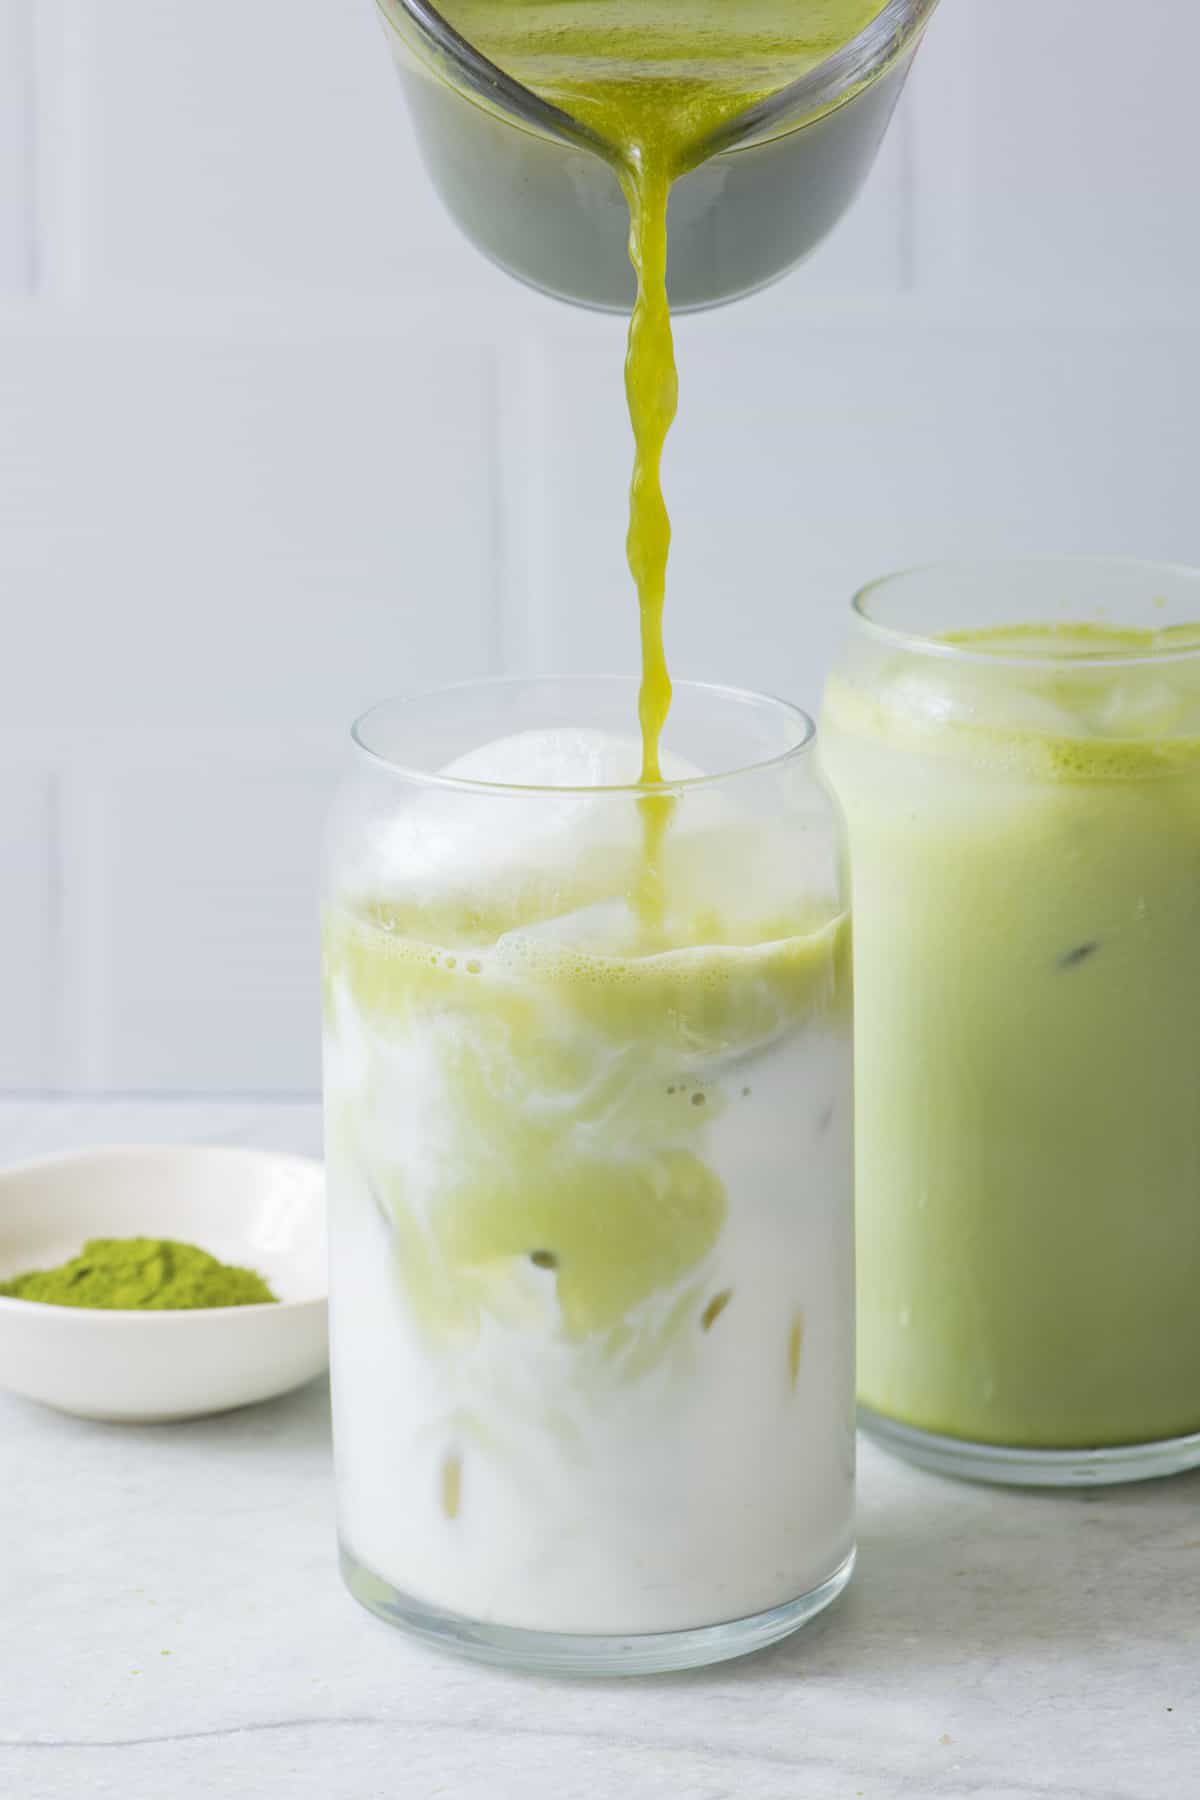 Matcha mixture being poured on top of a glass of iced milk with an additional mixed drink behind it.